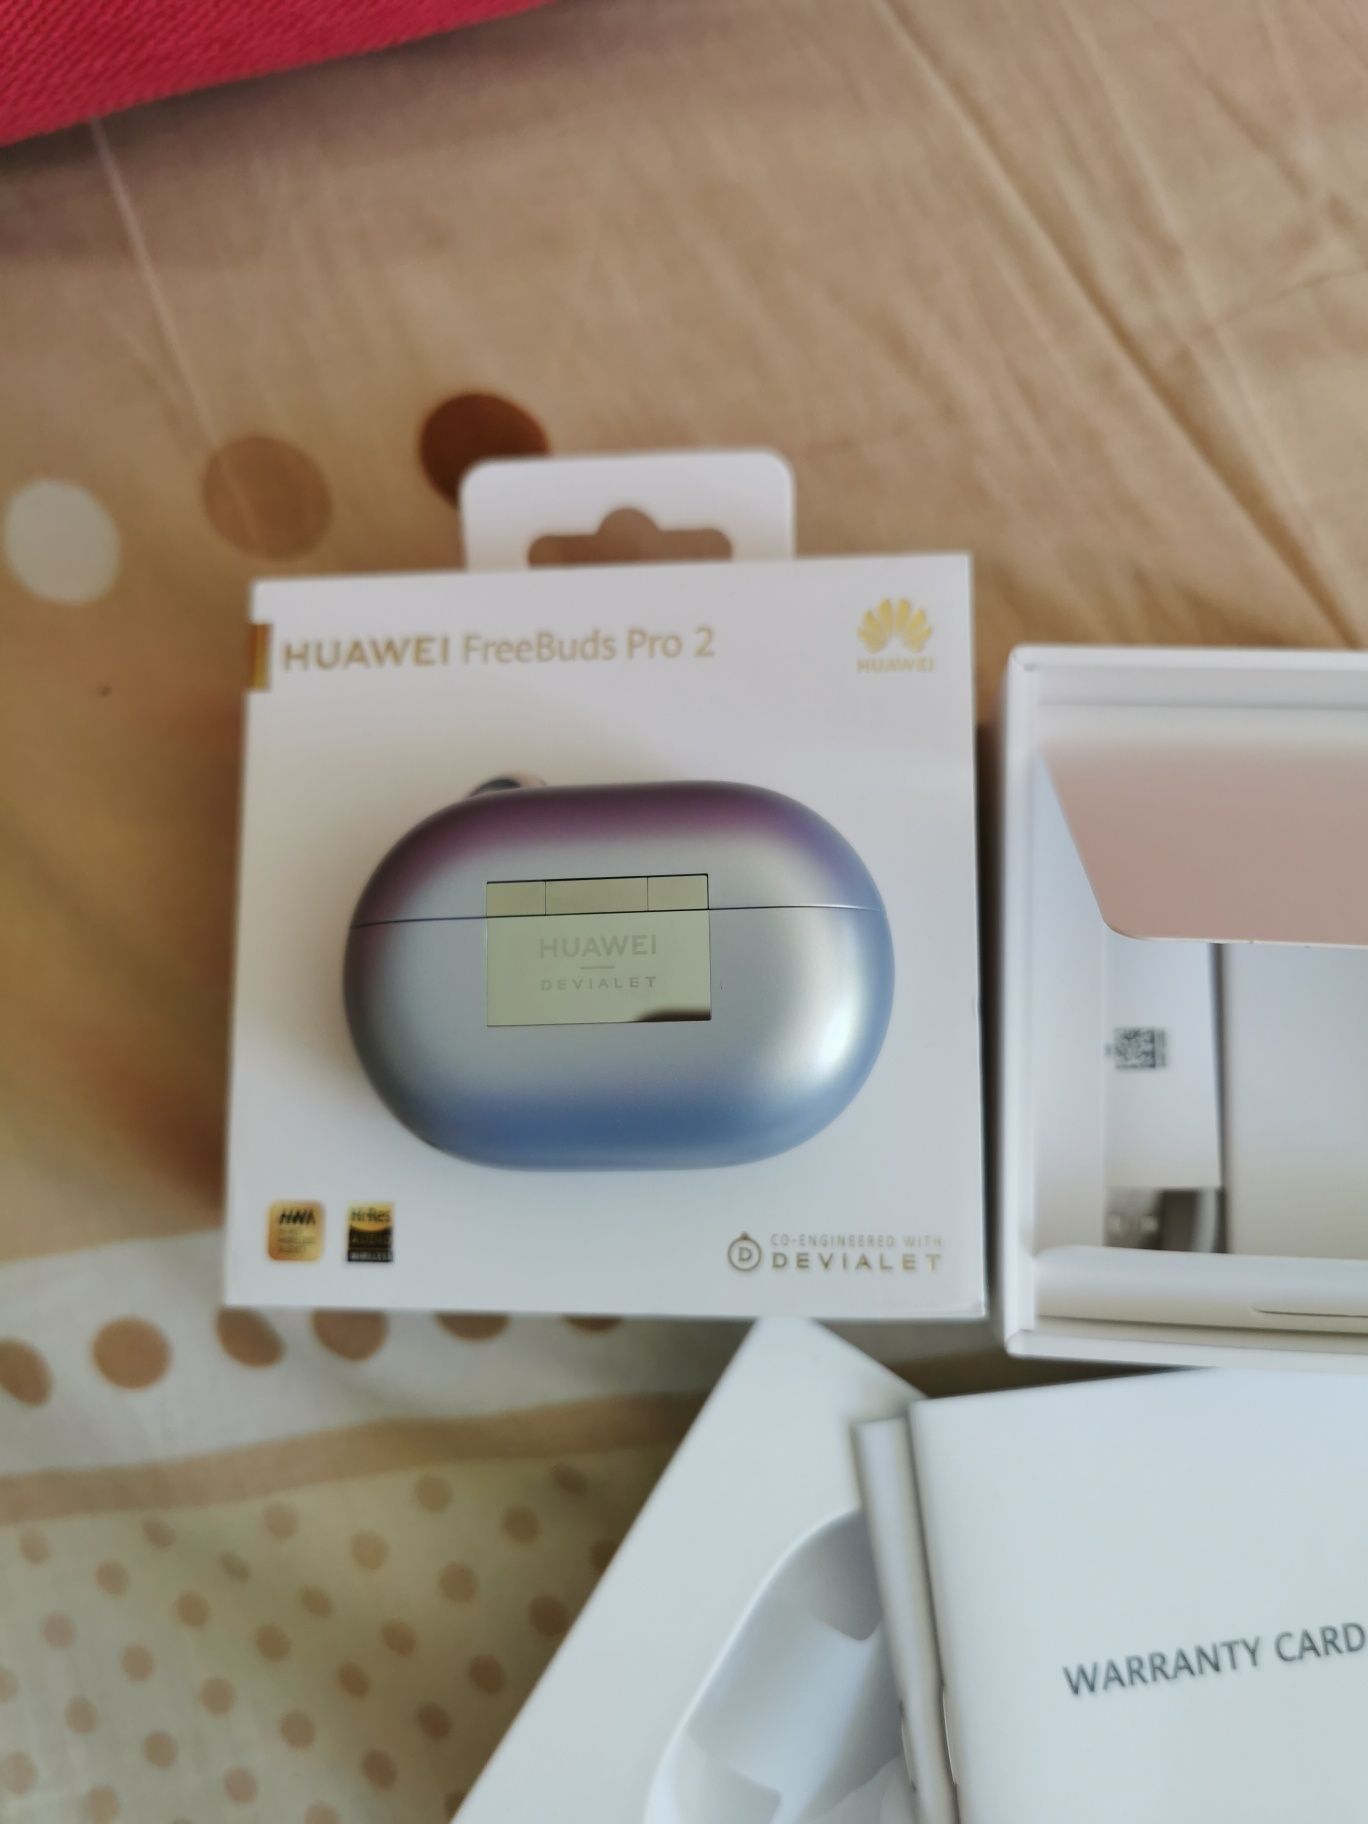 Huawei free buds pro 2.(Devialet)